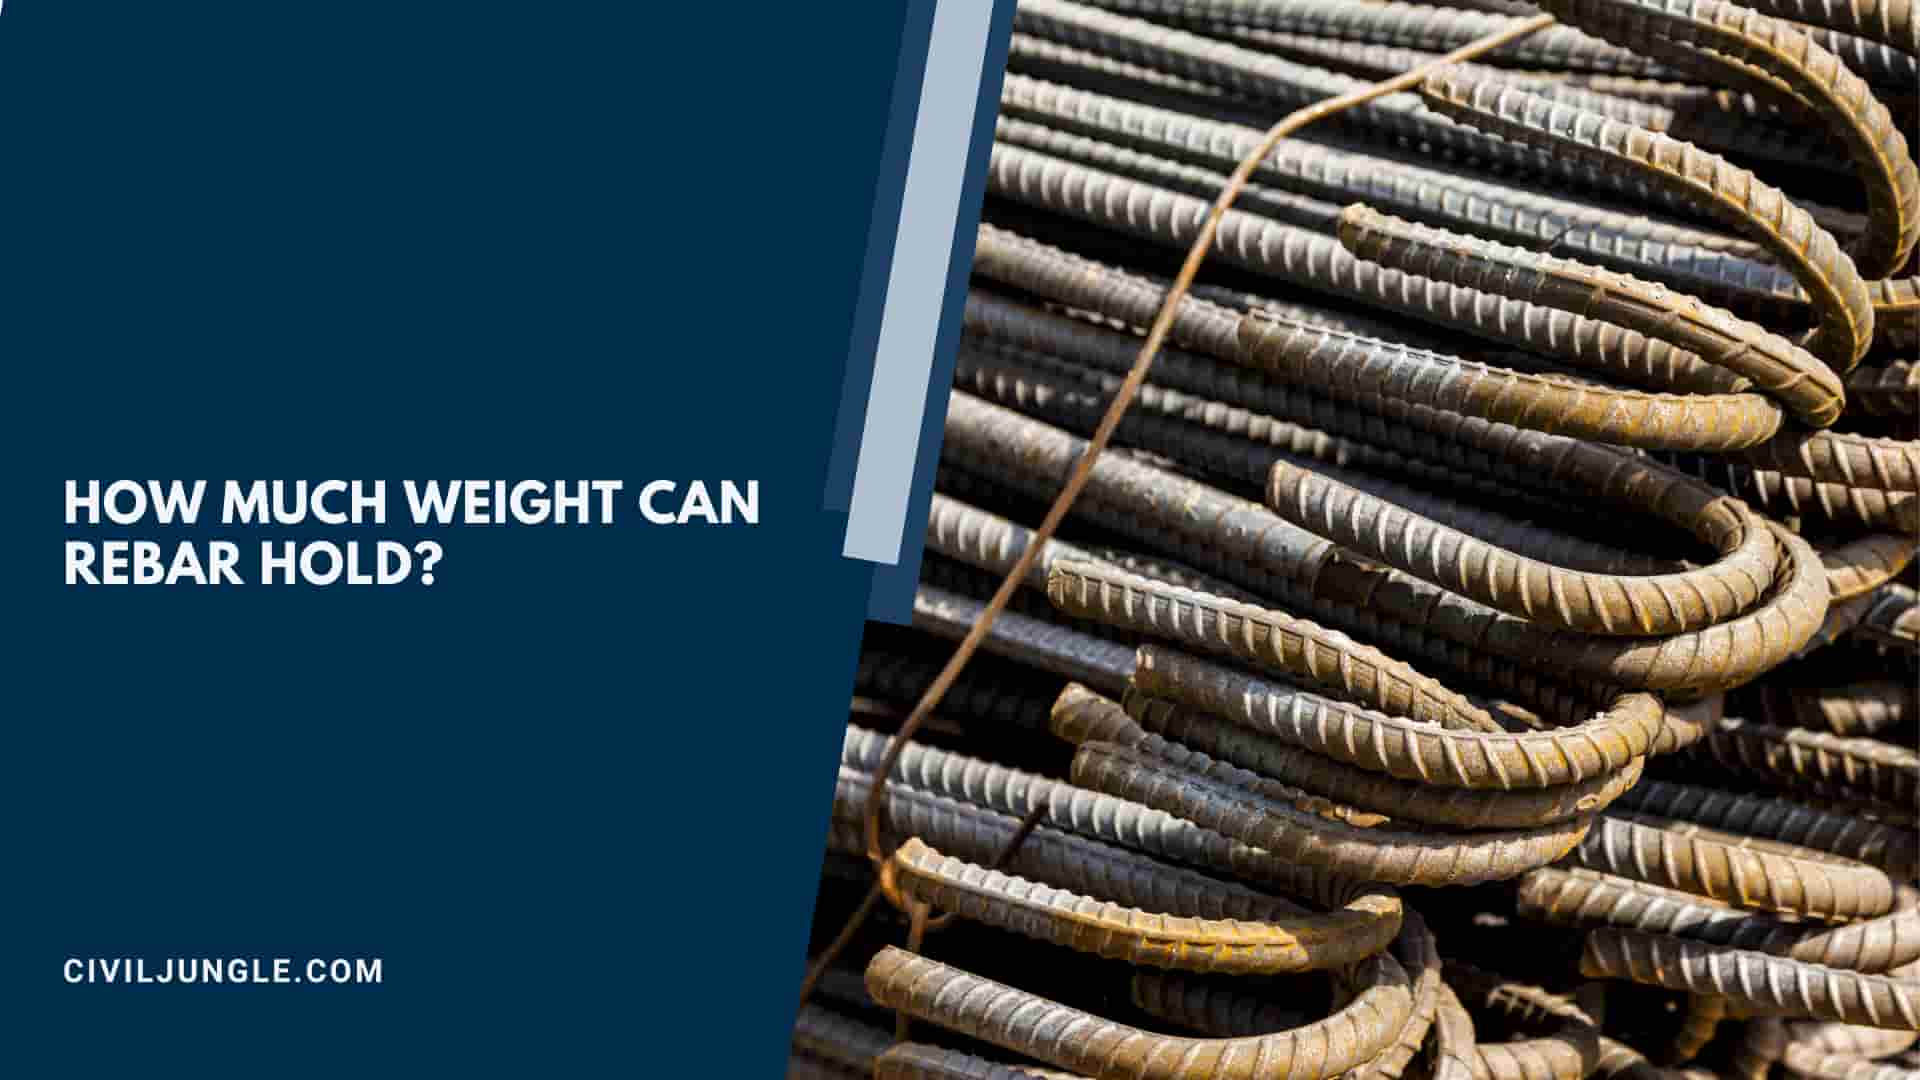 How Much Weight Can Rebar Hold?